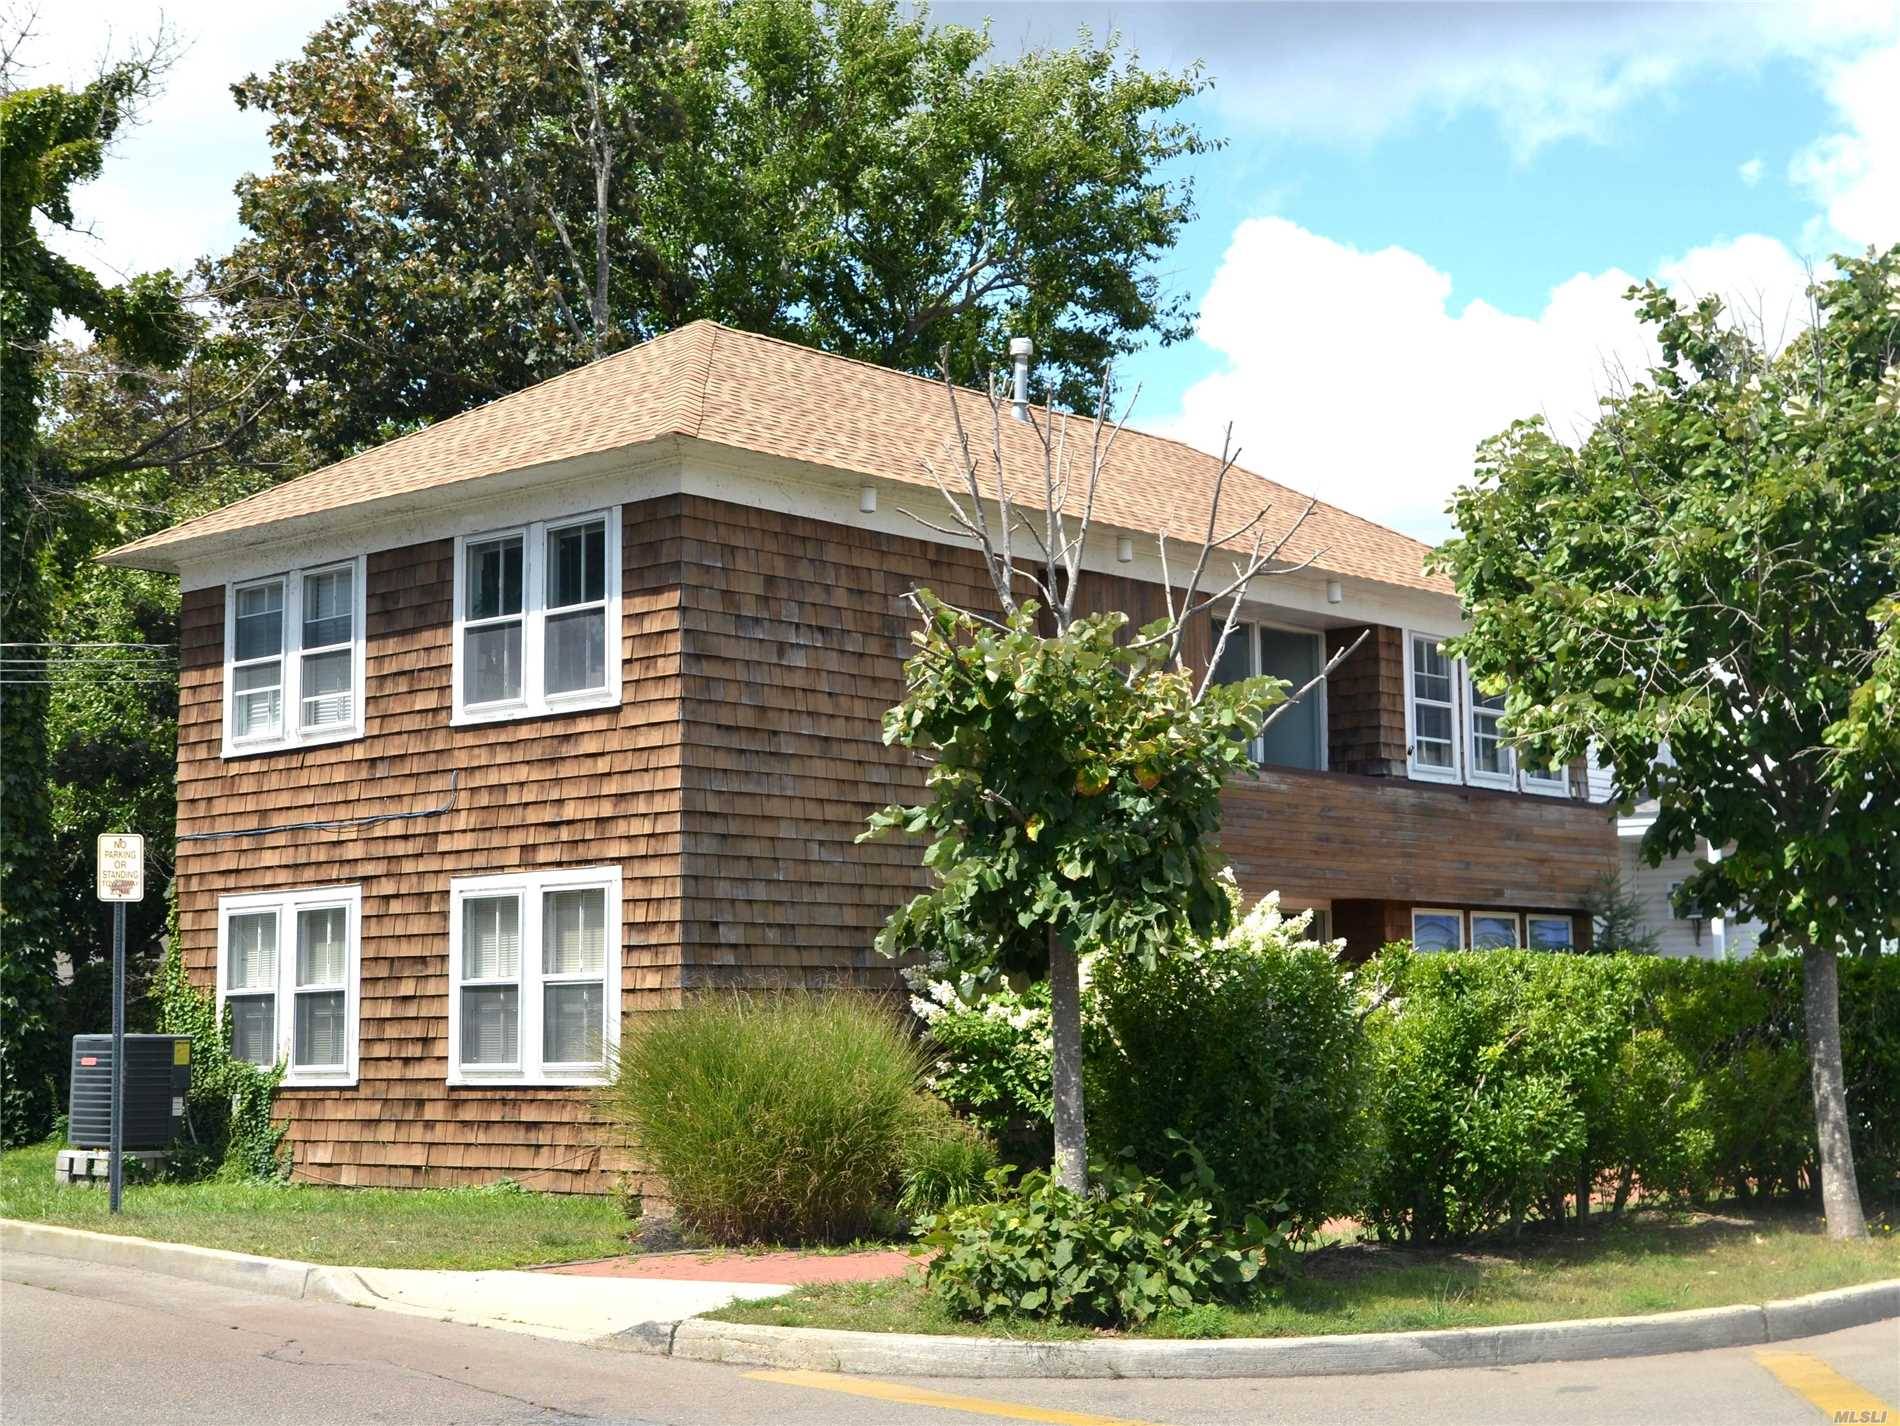 Located in the heart of Westhampton Beach Village and near municipal parking, this meticulously maintained commercial building offers 5 multi use offices spaces with beautiful views of the canal.